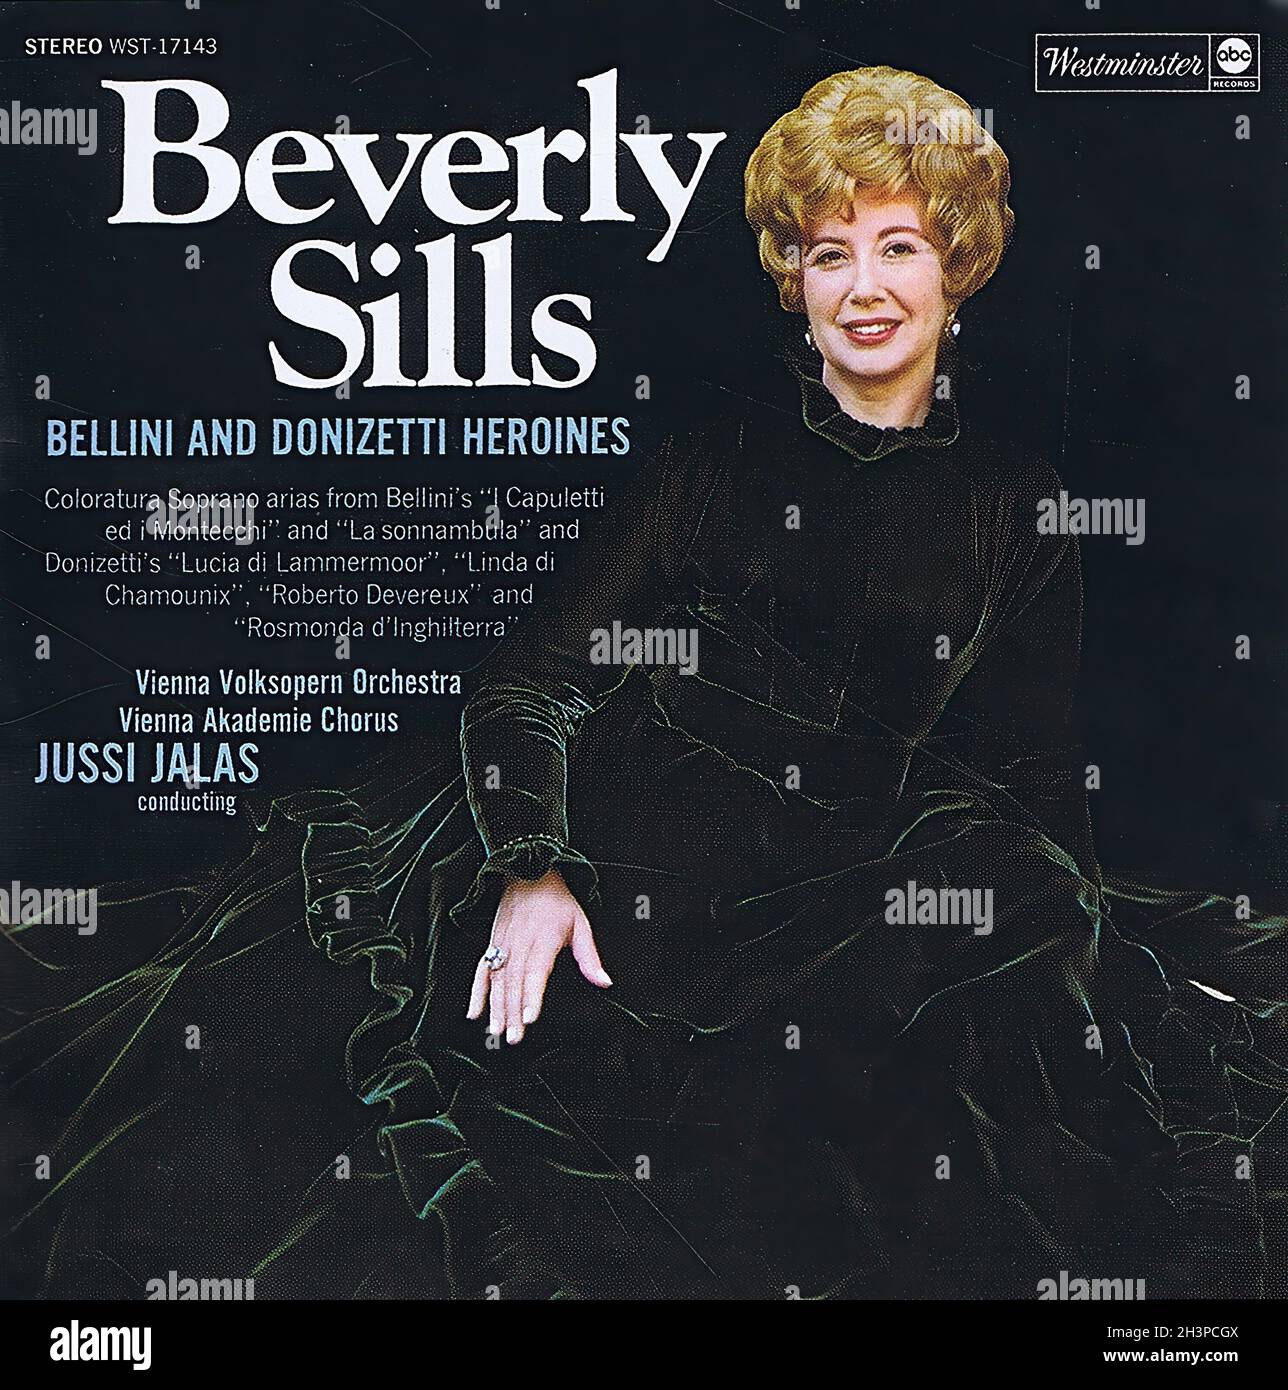 Beverly Sills sings Bellini & Donizetti Heroines - Westminster Legacy CD - Classical Music Vintage Vinyl Record Stock Photo